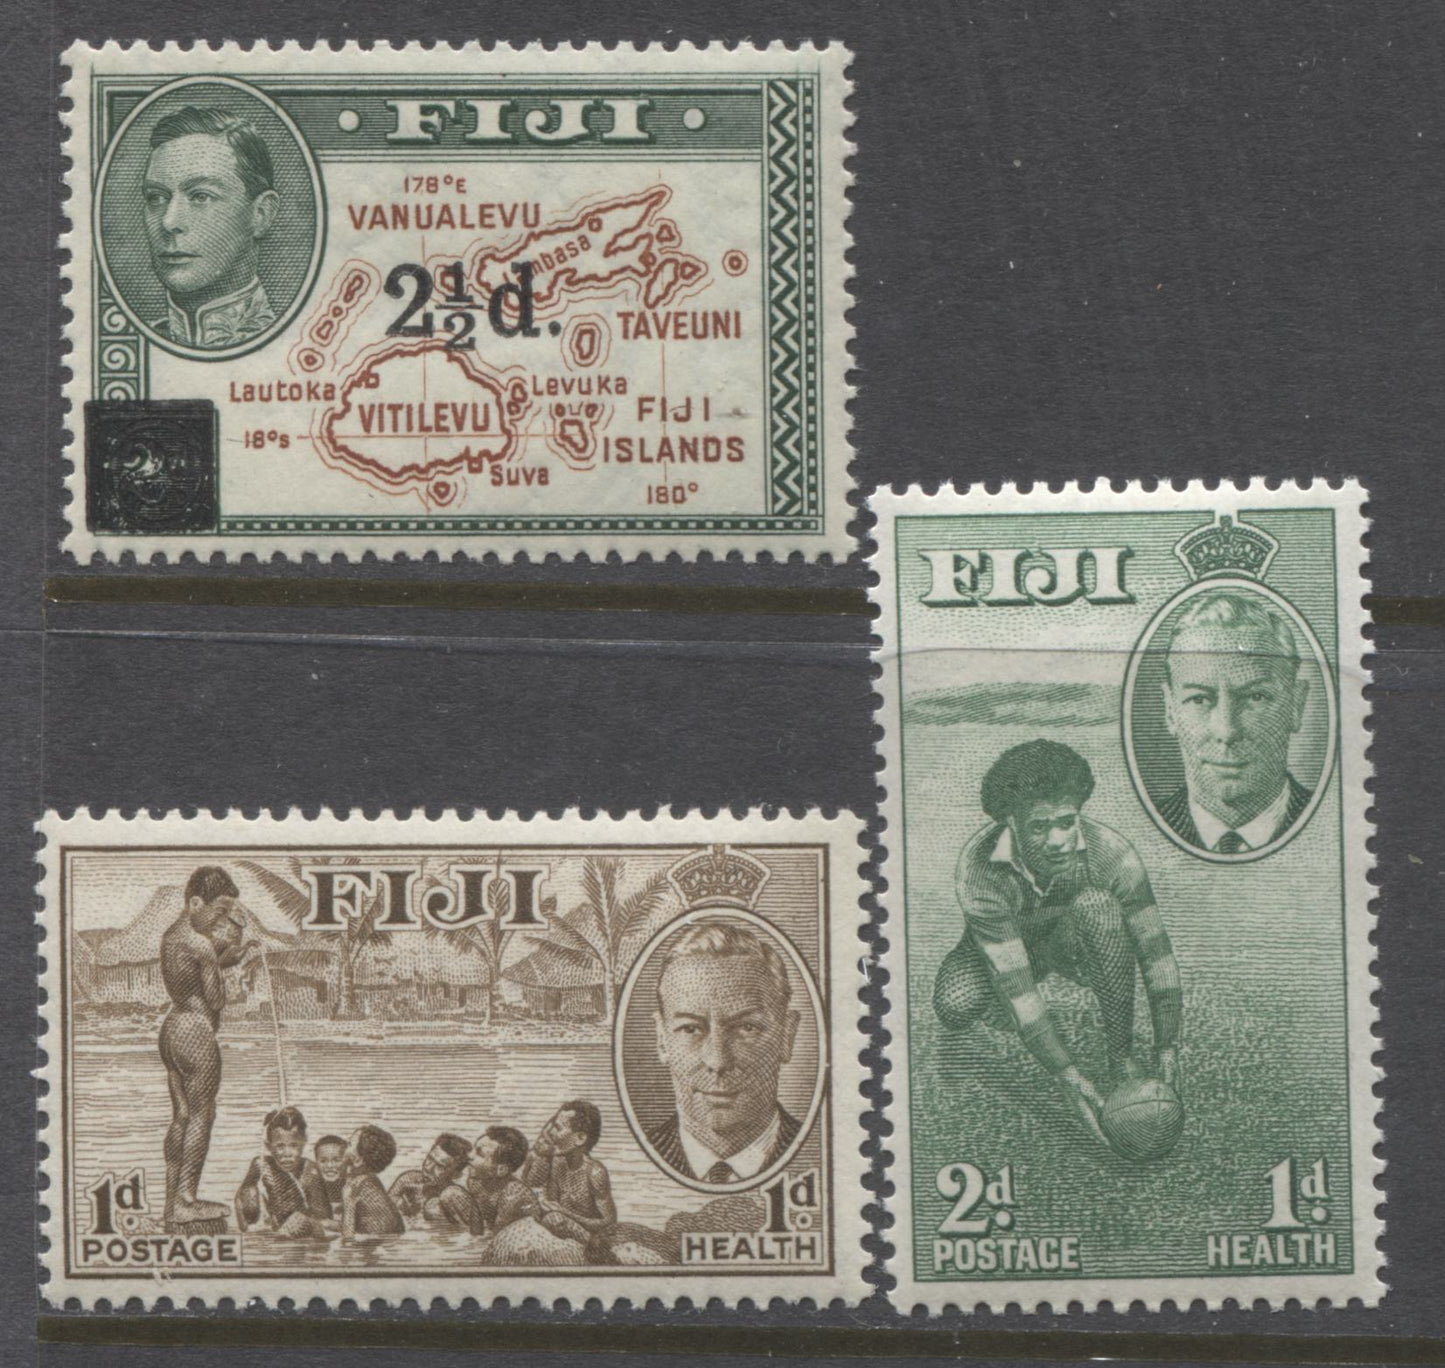 Lot 94 Fiji SG#267, 276-277 1941 2.5d Surcharge and 1951 Health Issue, VFNH Complete Sets, SG. Cat 3.10 GBP = $5.33